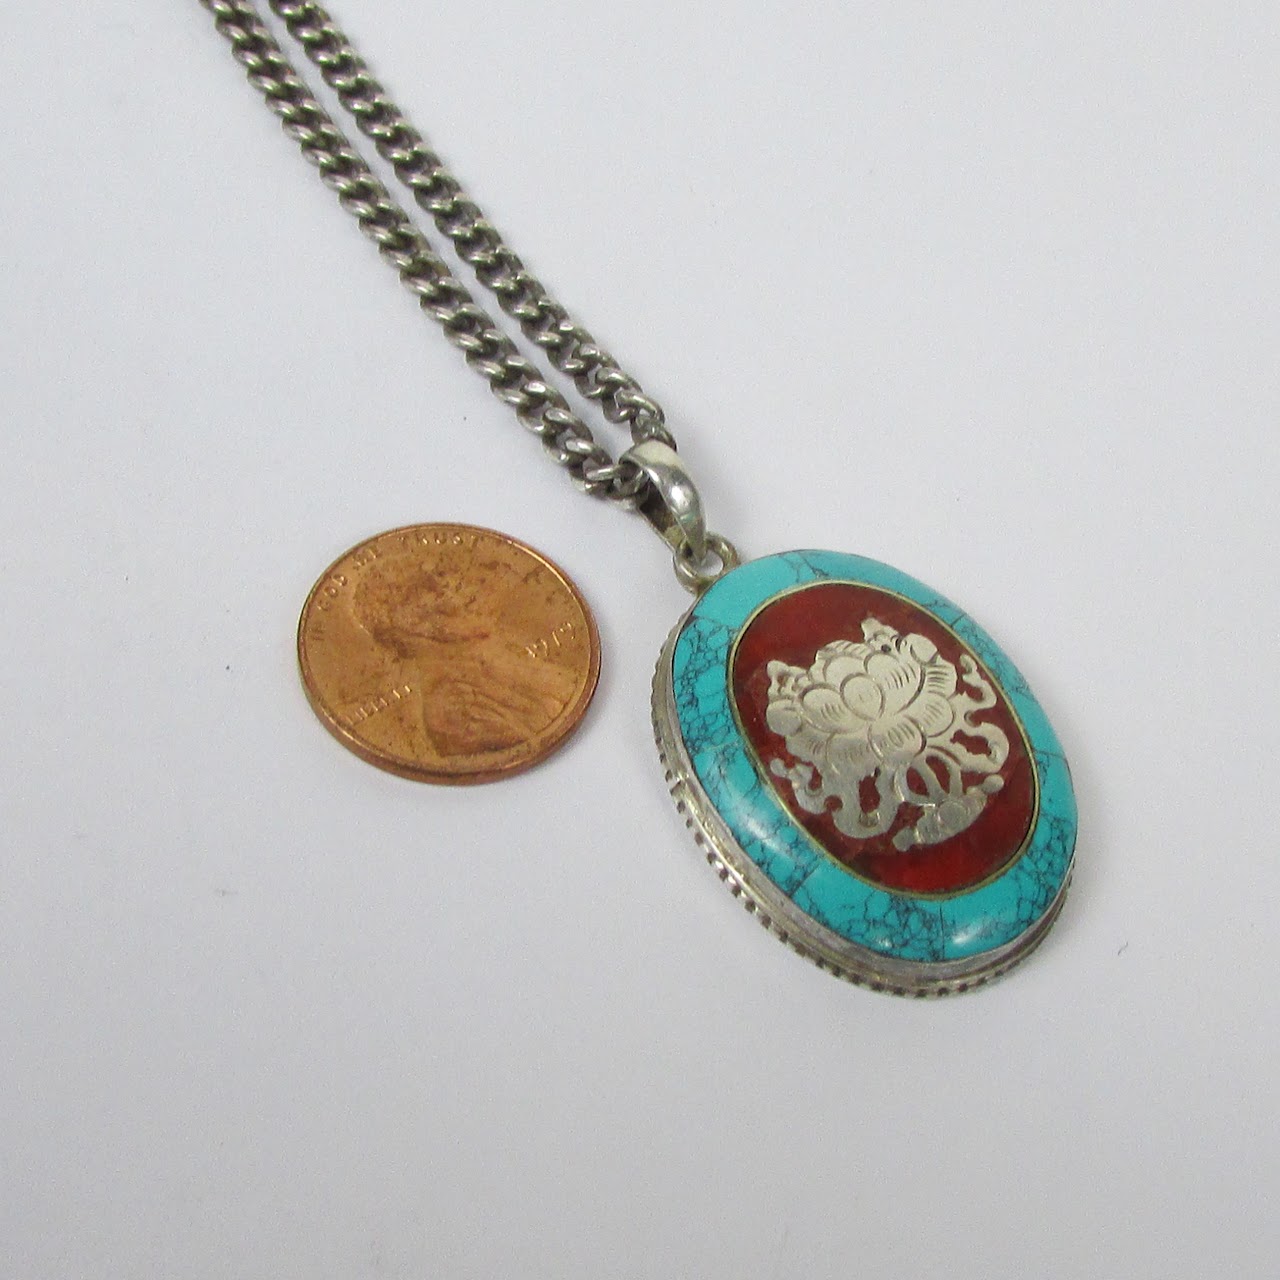 Sterling Silver Turquoise & Jasper Pendant Necklace